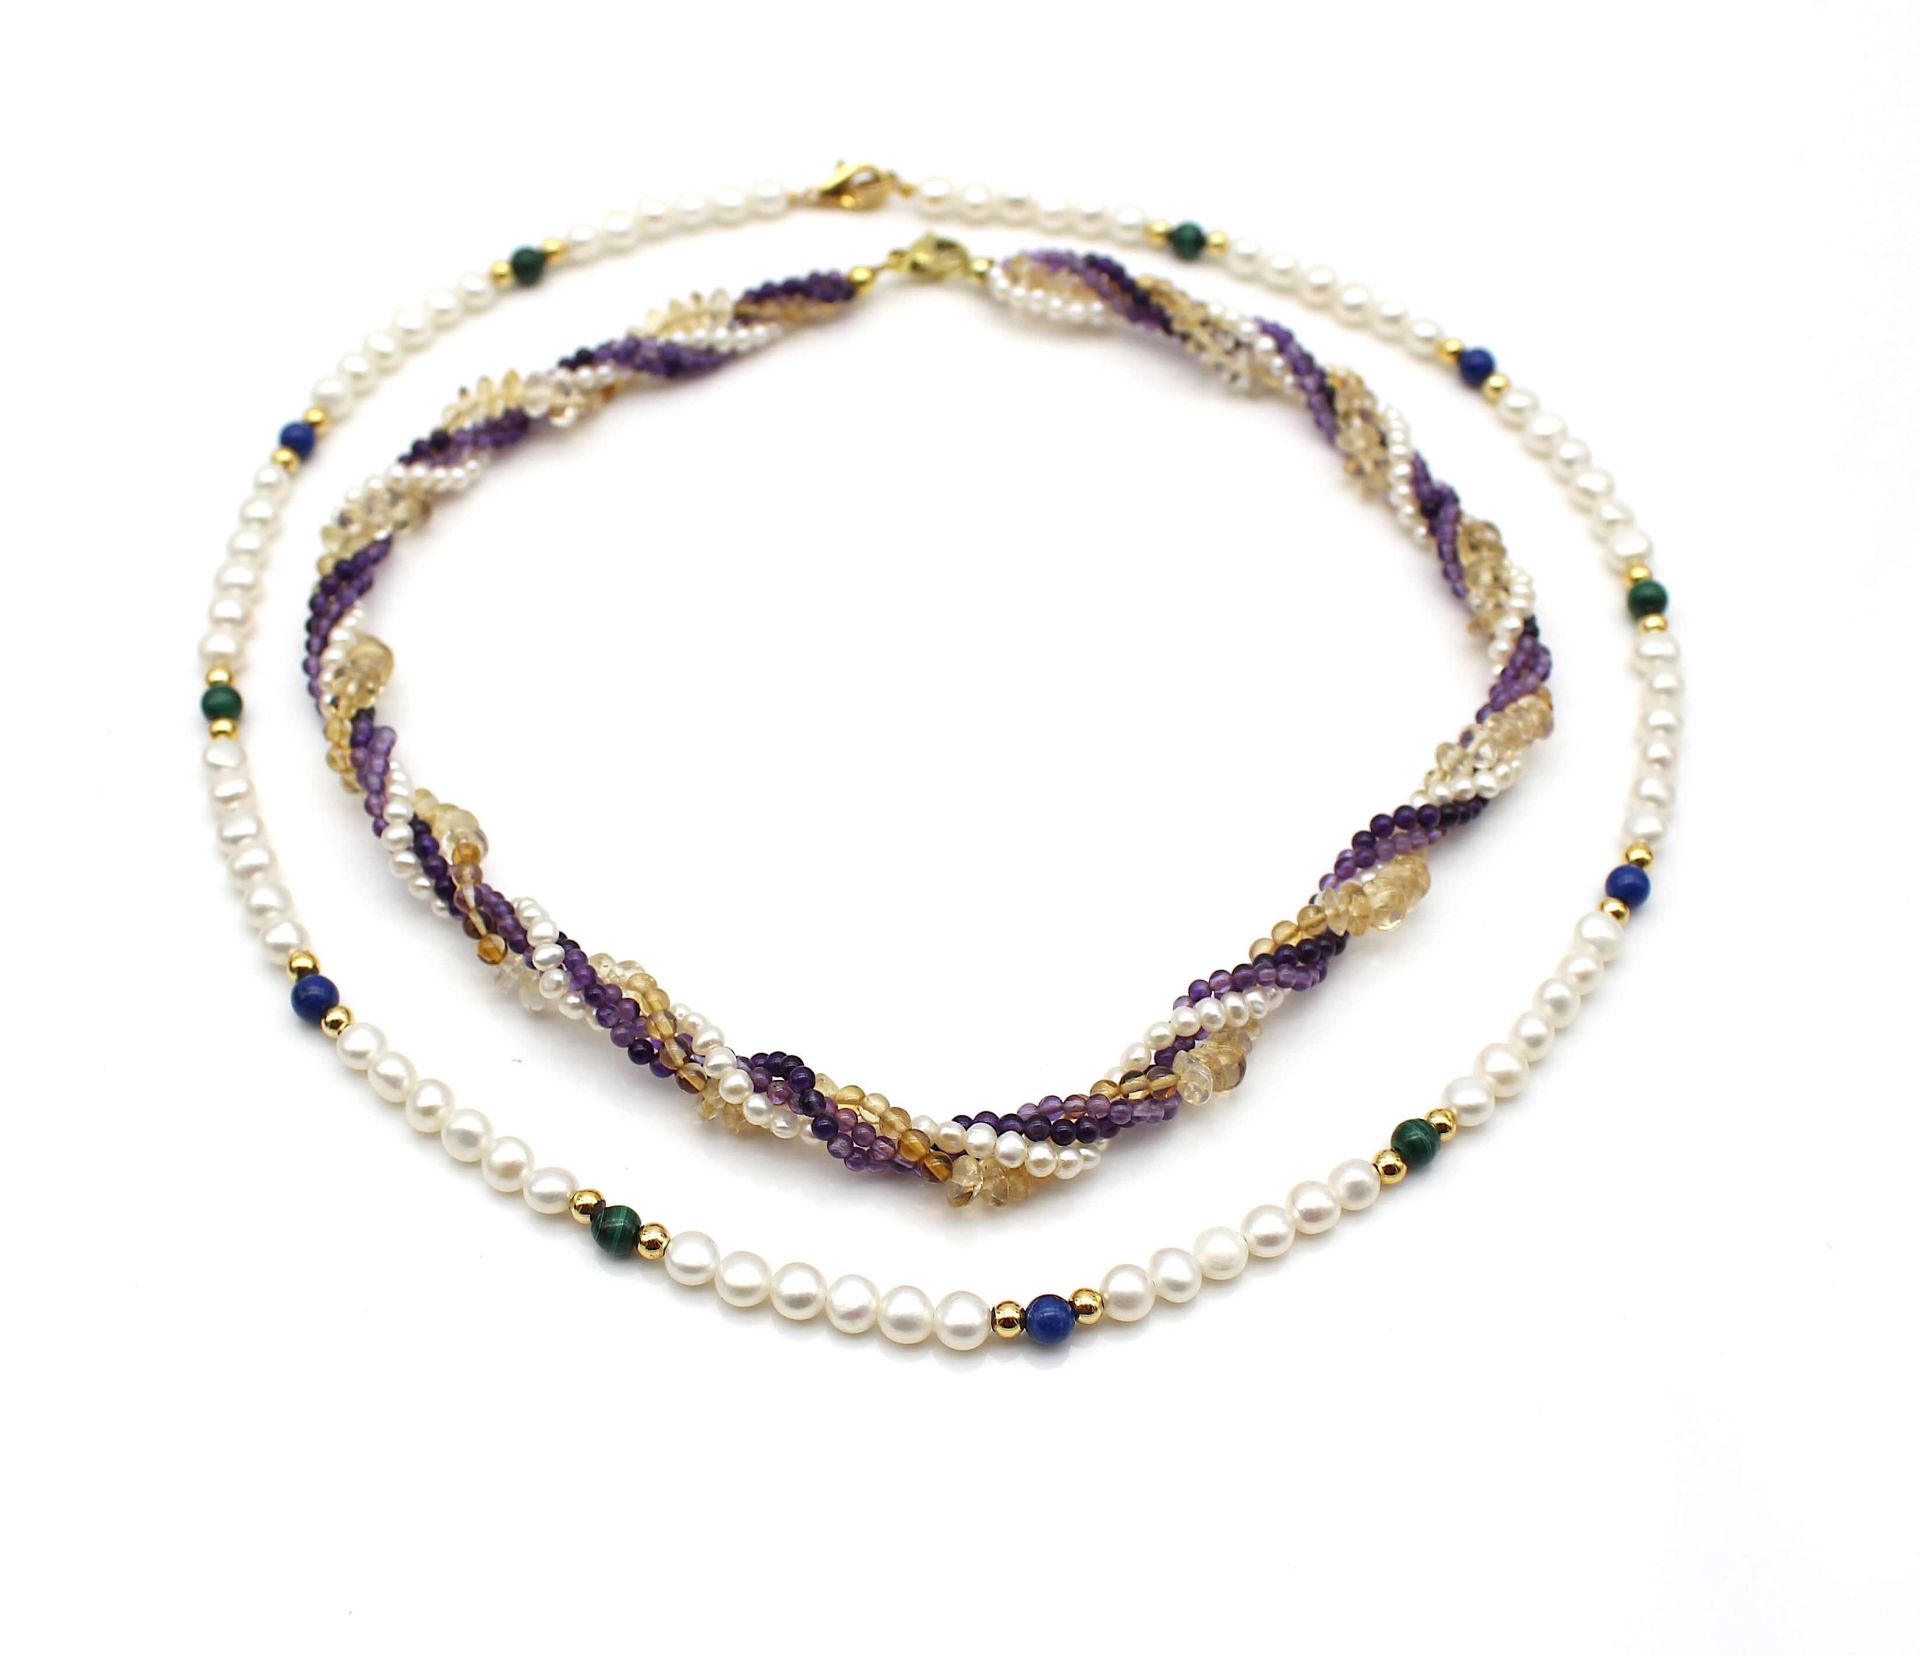 2 chains with cultured pearls, amethysts, quartz, malachite and lapis